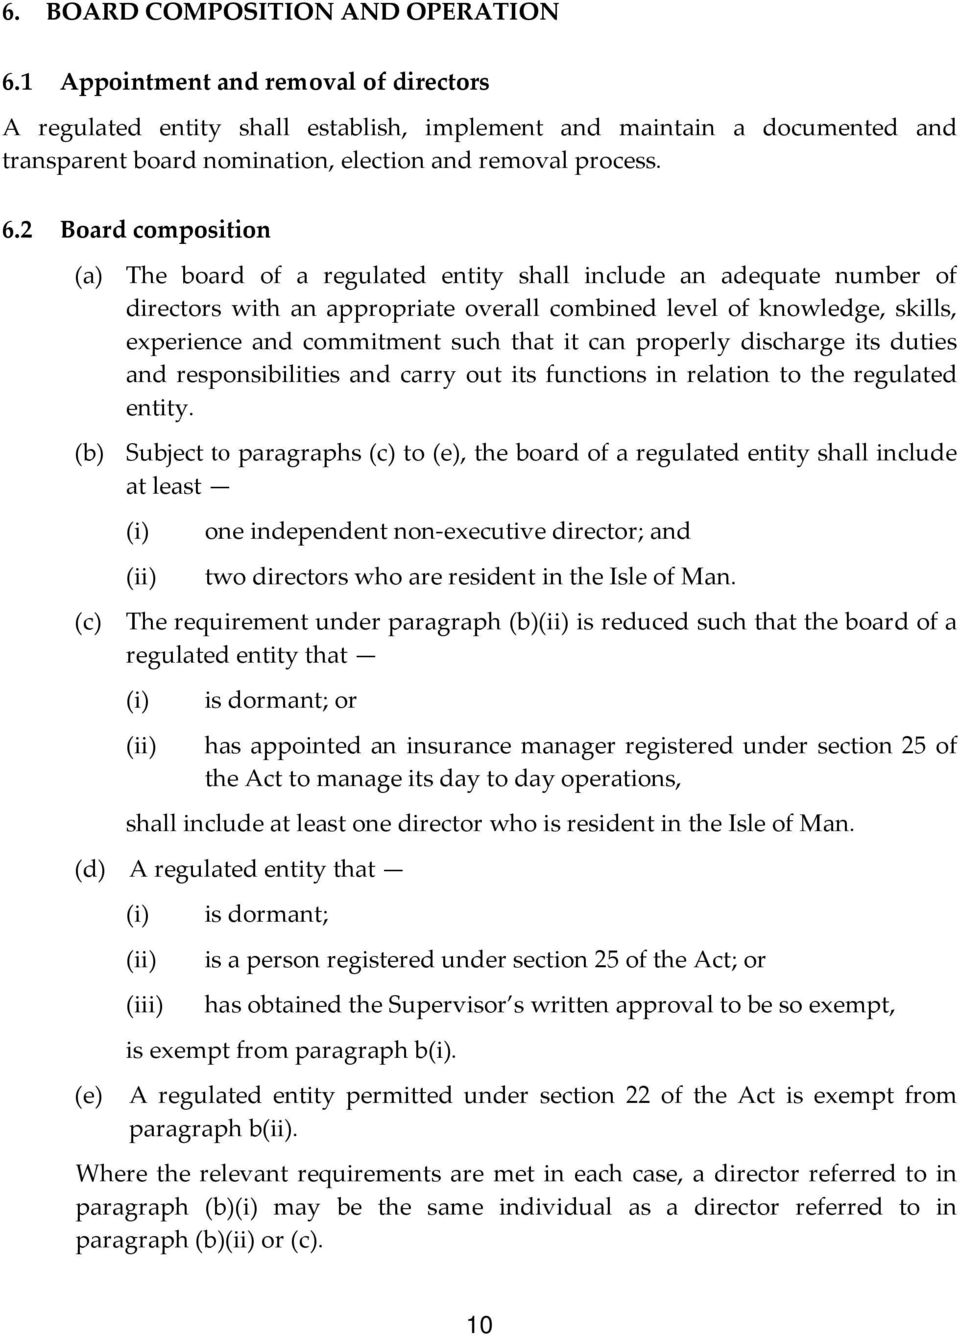 2 Board composition (a) The board of a regulated entity shall include an adequate number of directors with an appropriate overall combined level of knowledge, skills, experience and commitment such